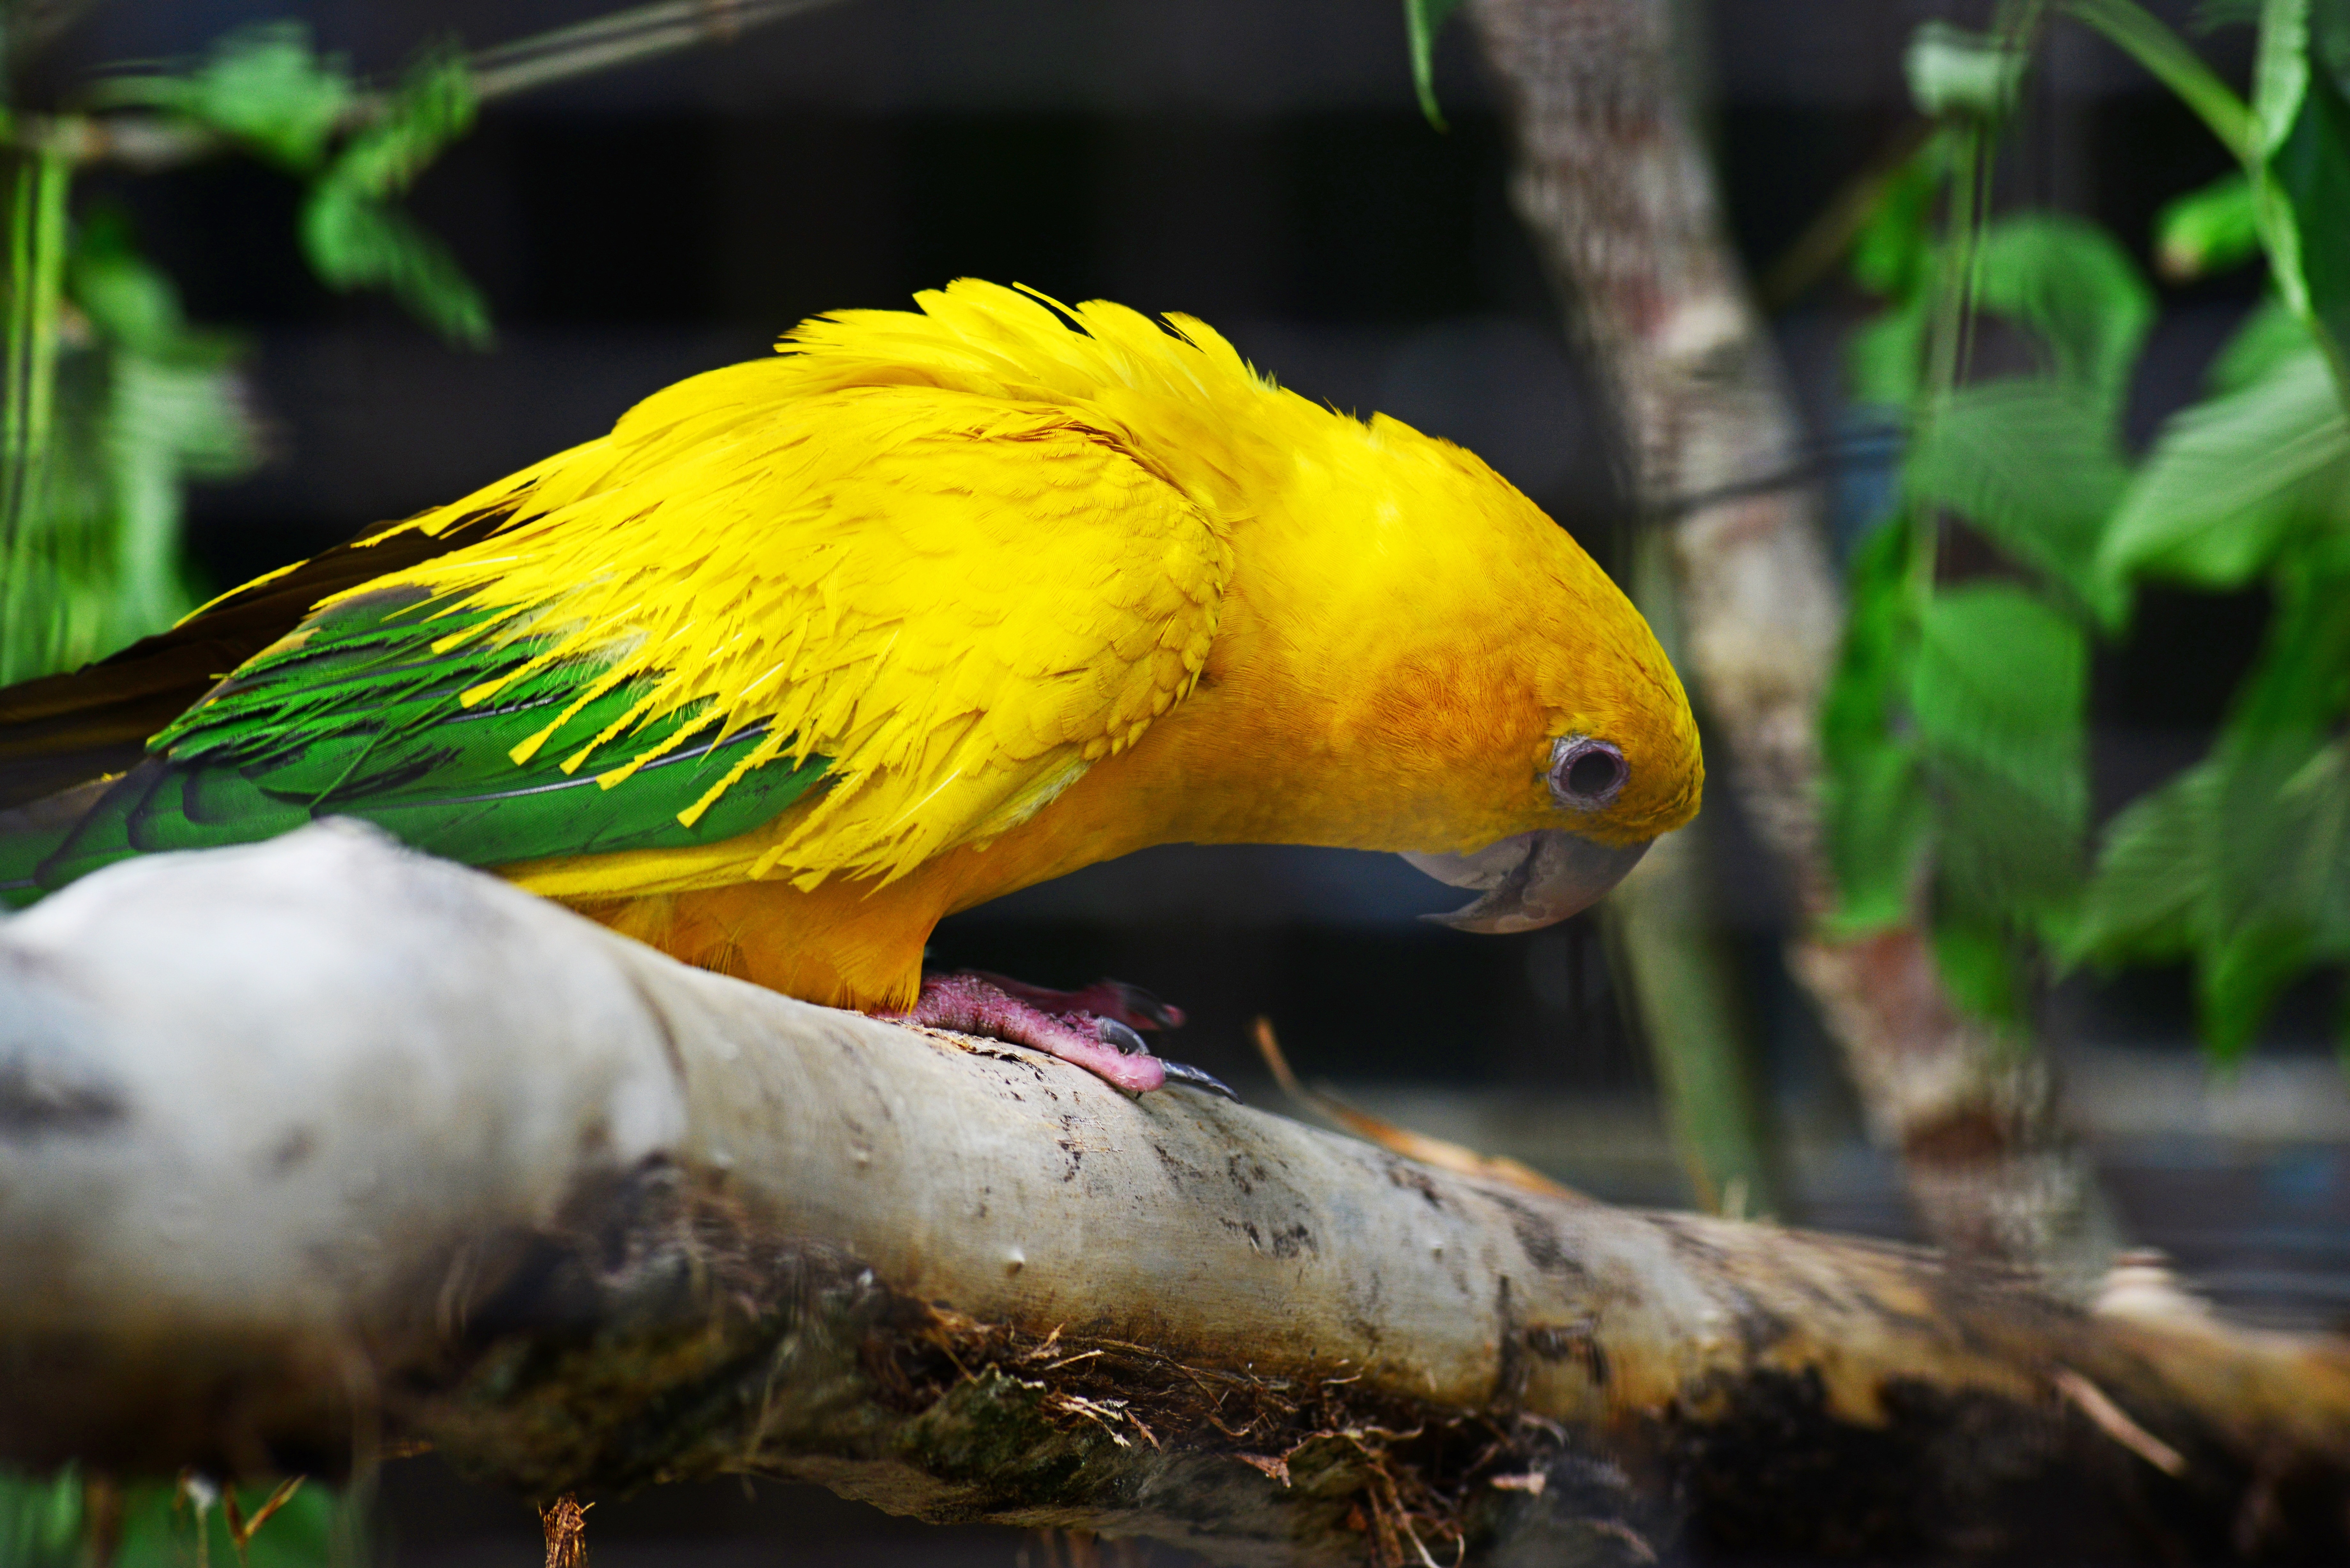 Golden Conure, Parrot, one animal, animal themes